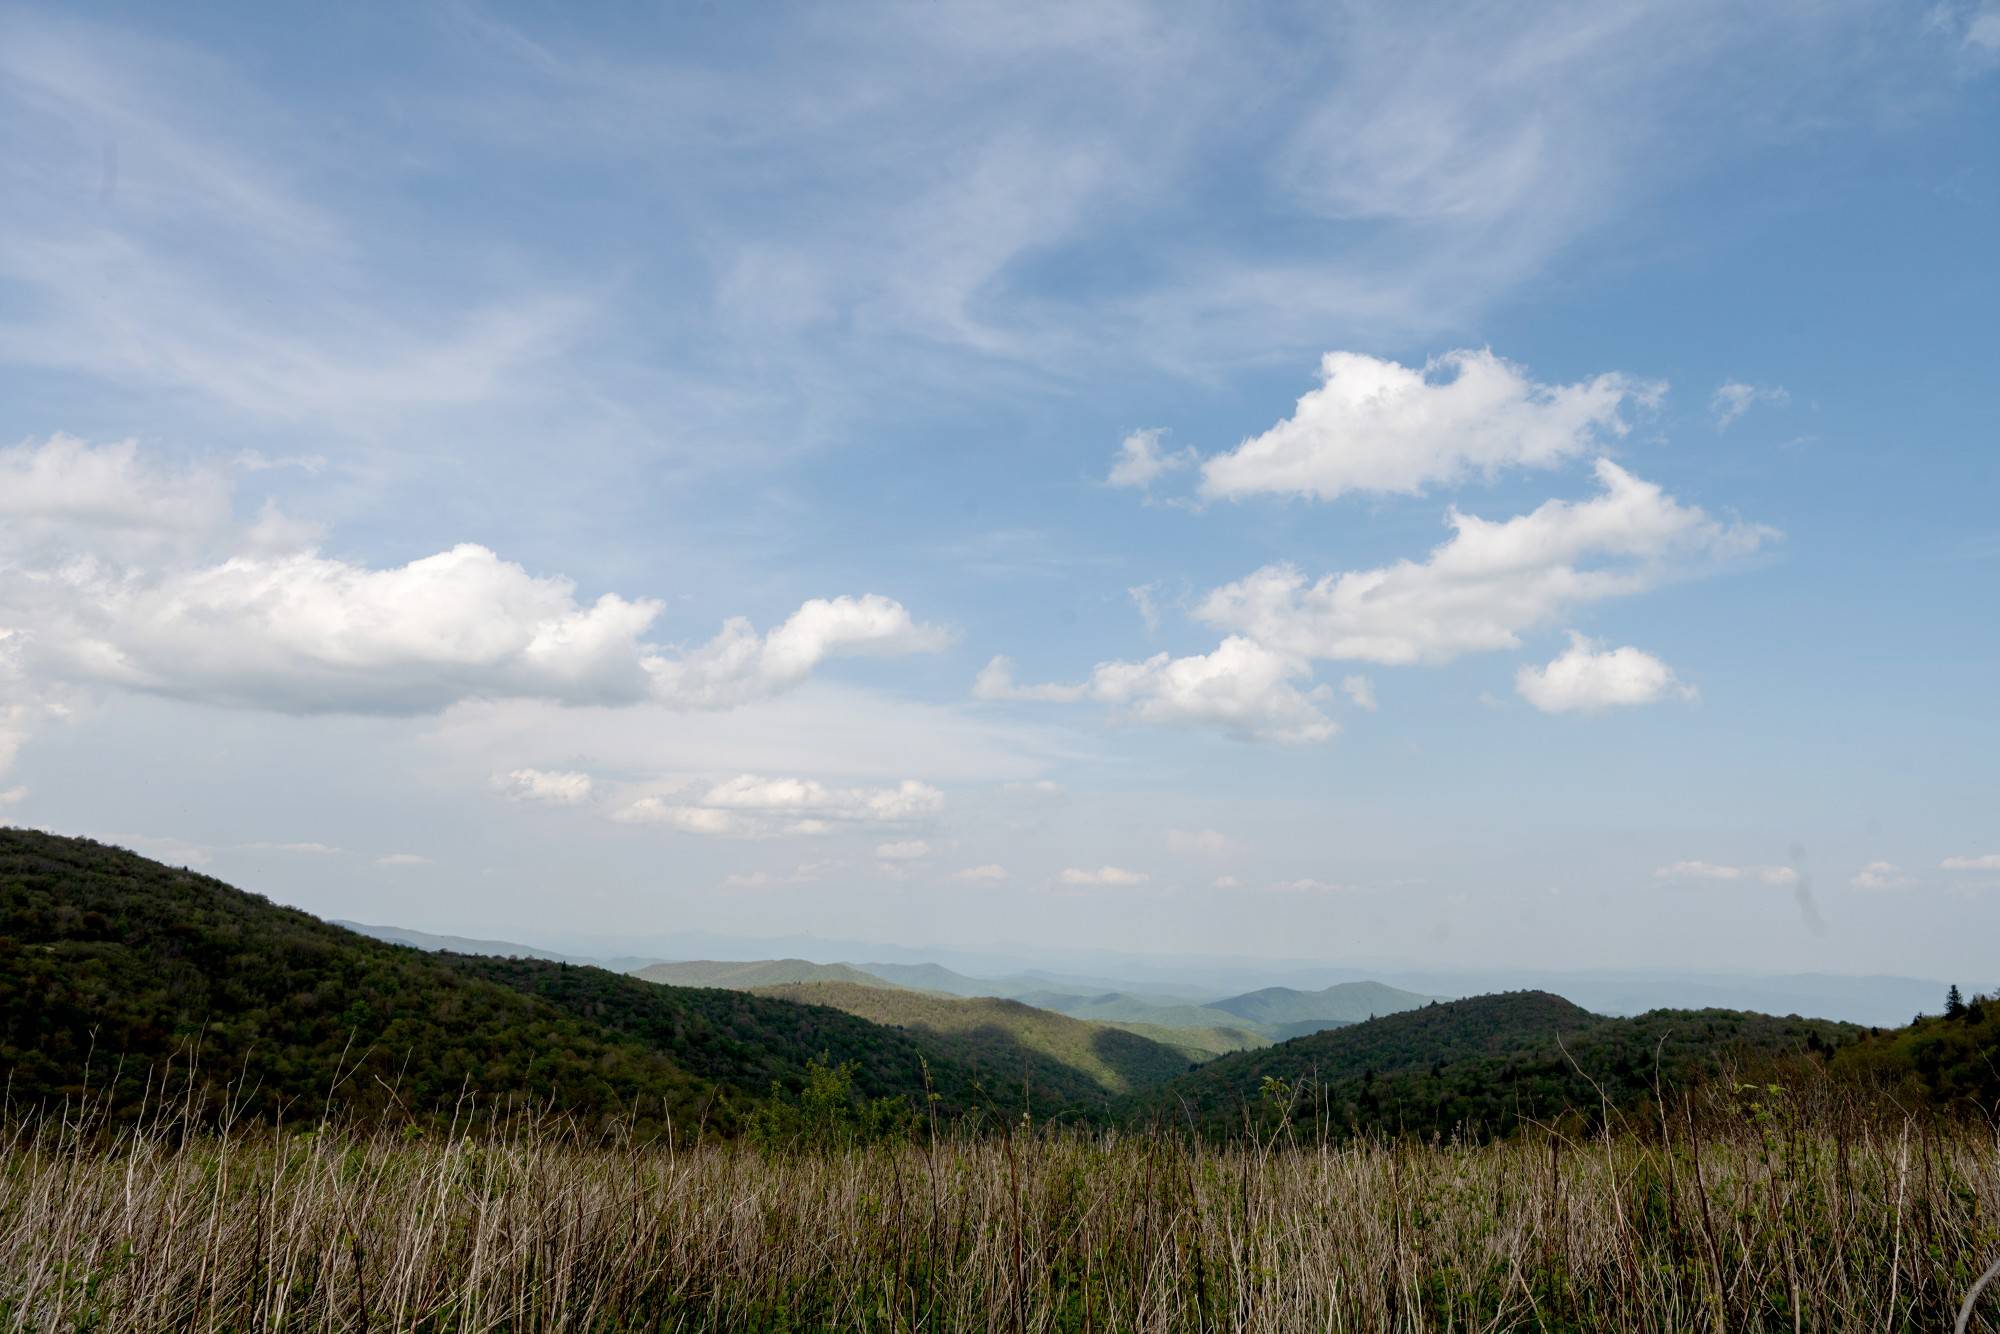 Pisgah National Forest is comprised of more than 500,000 acres and hundreds of miles of trails in western North Carolina.